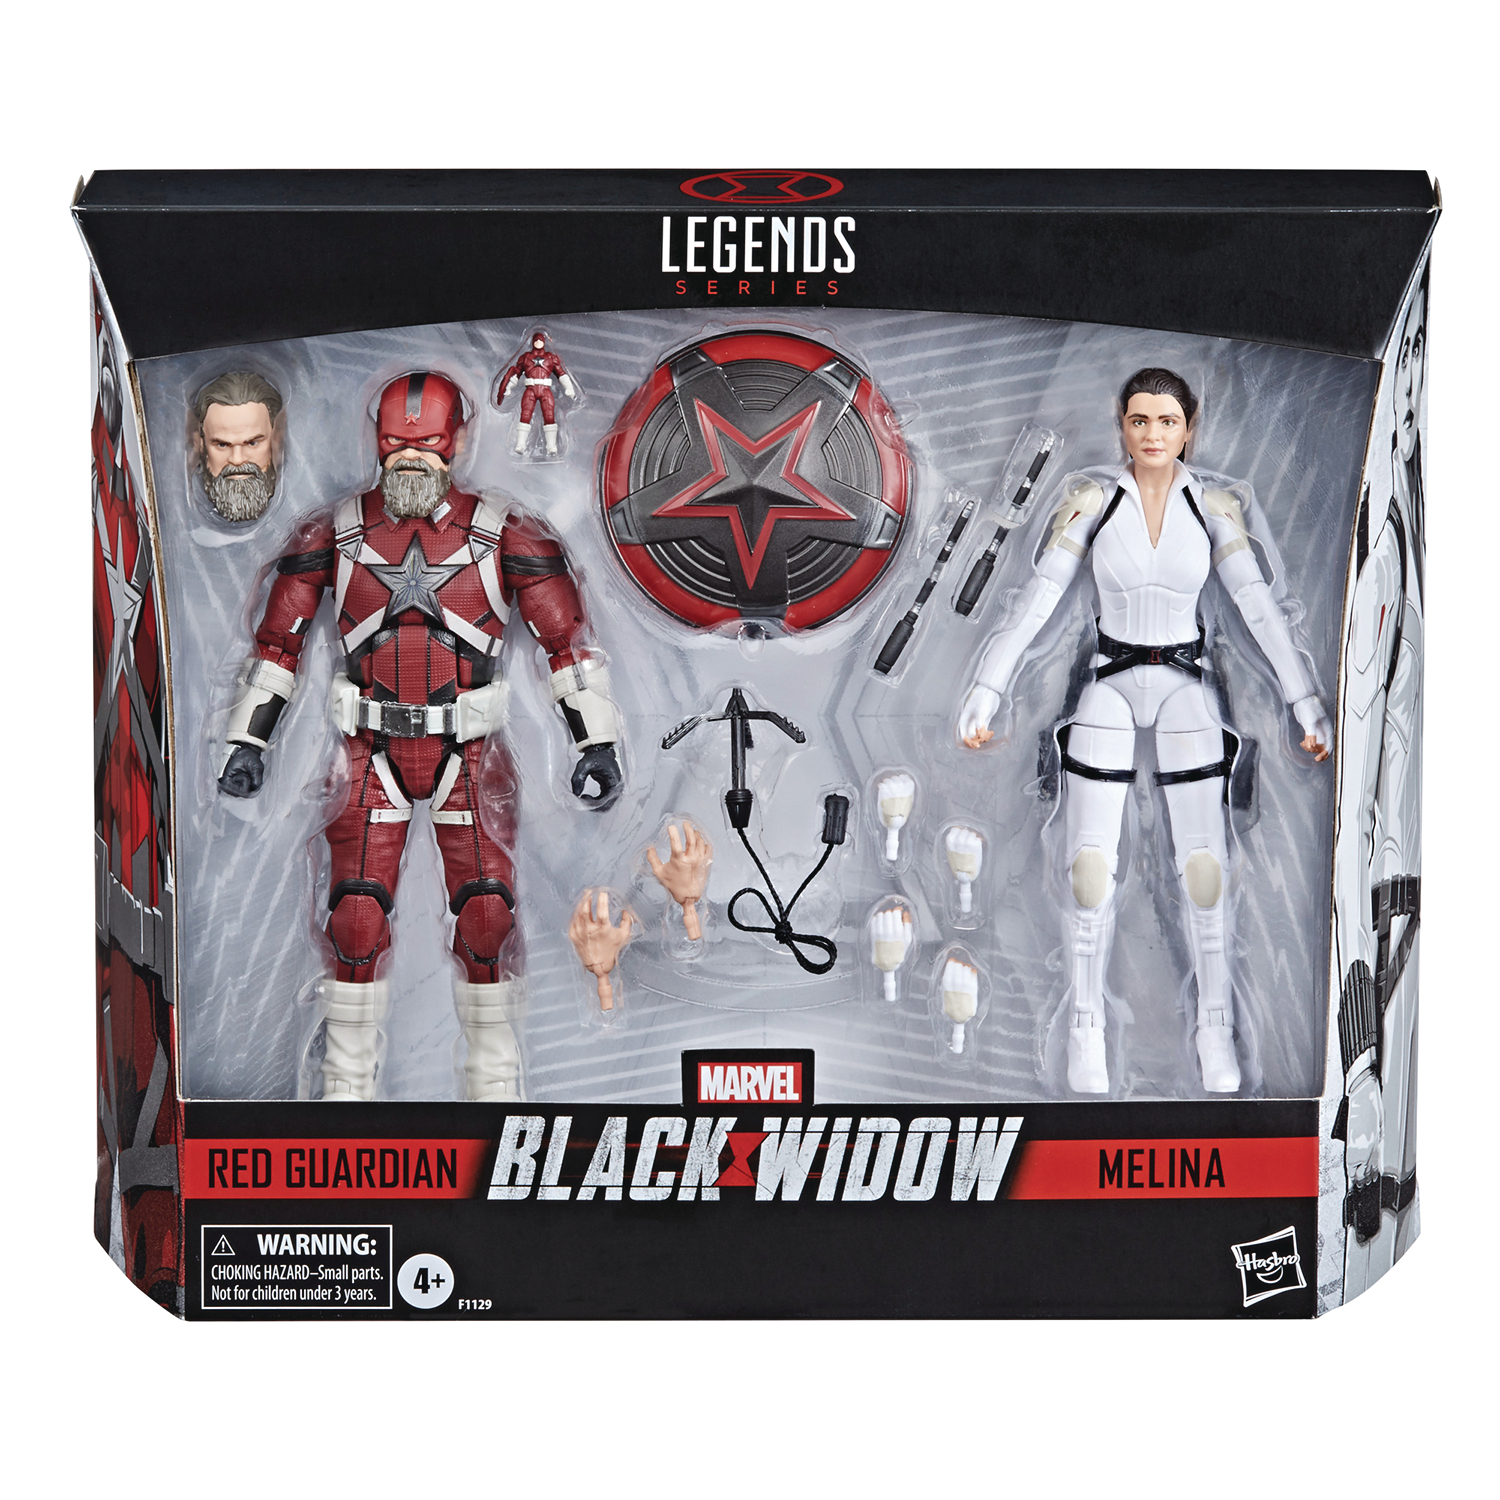 Black Widow Legends 6 Inch Red Guardian/melina 2 Pack Action Figure Case